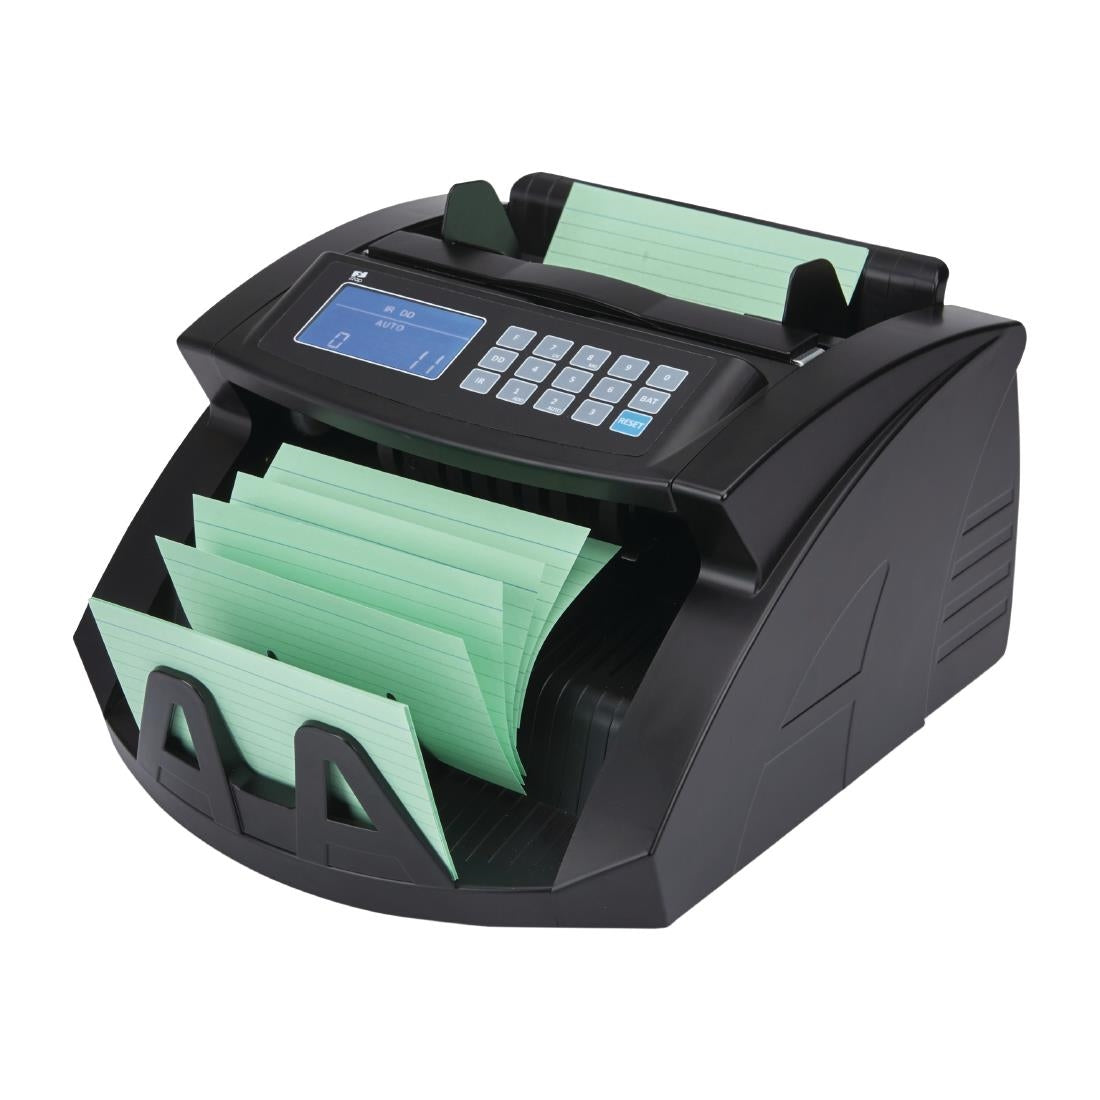 CN904 ZZap NC20i Banknote Counter